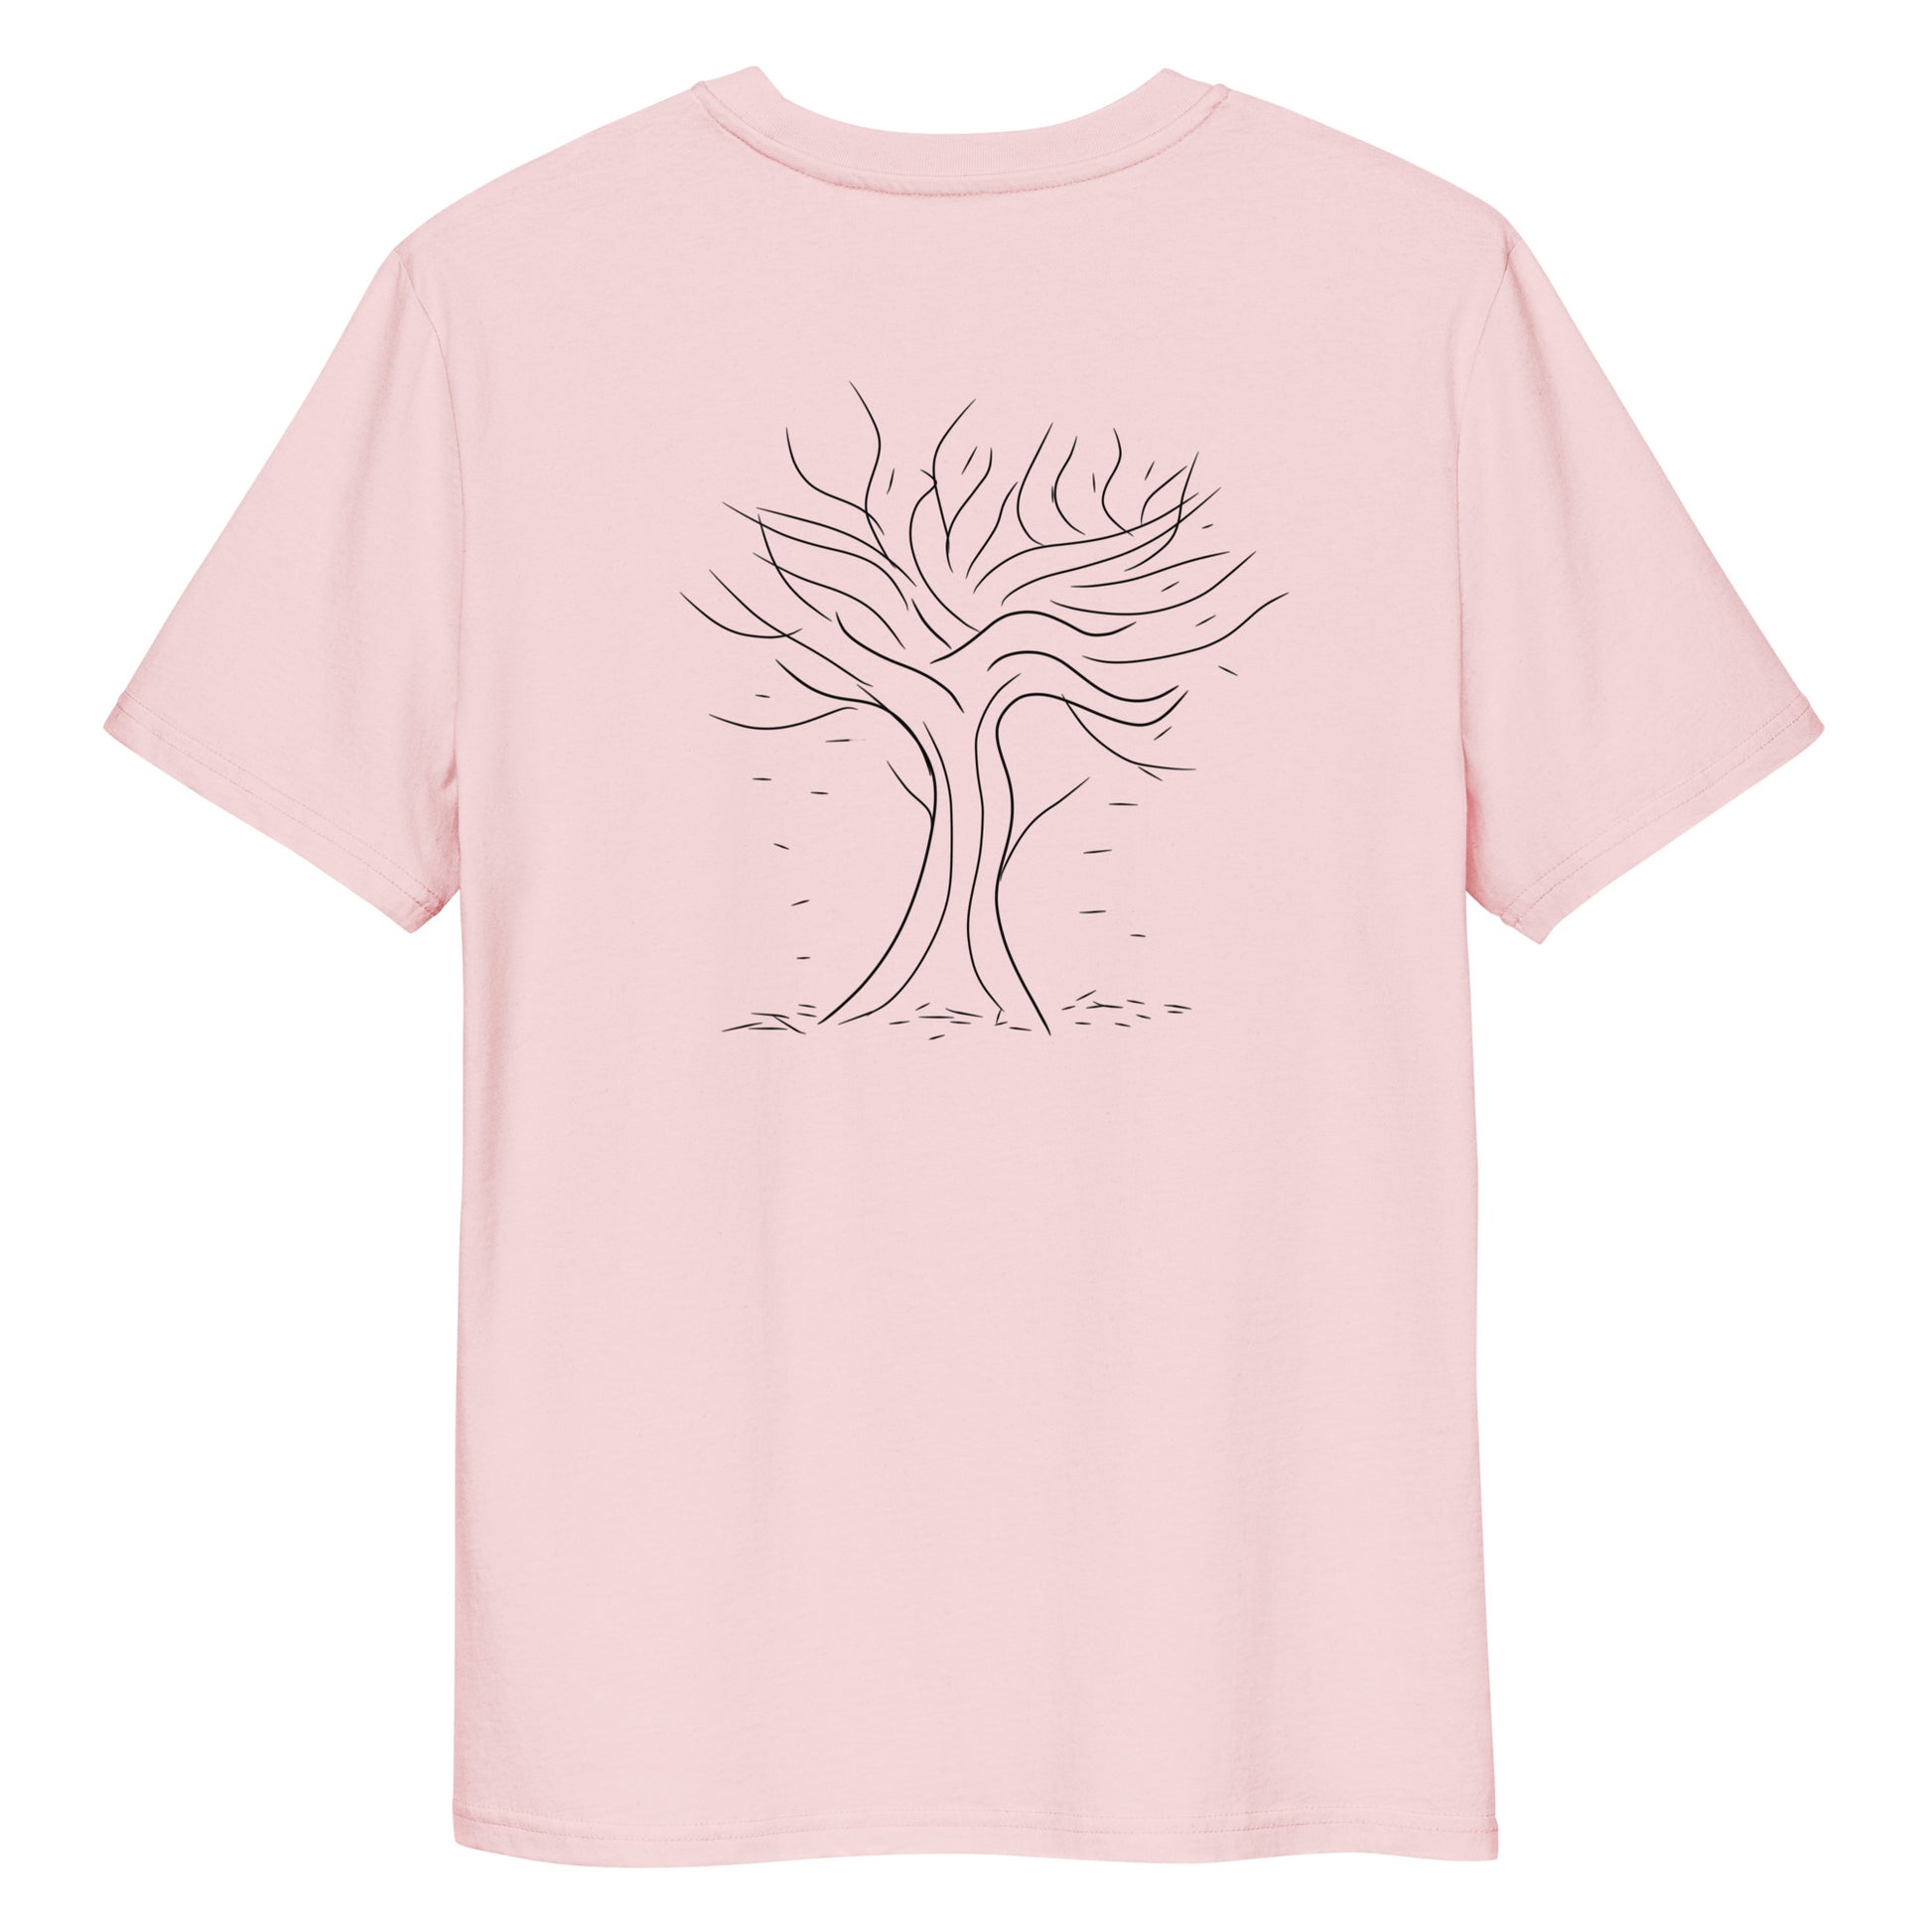 Autumn Tree Trance | 100% Organic Cotton T Shirt in pink back